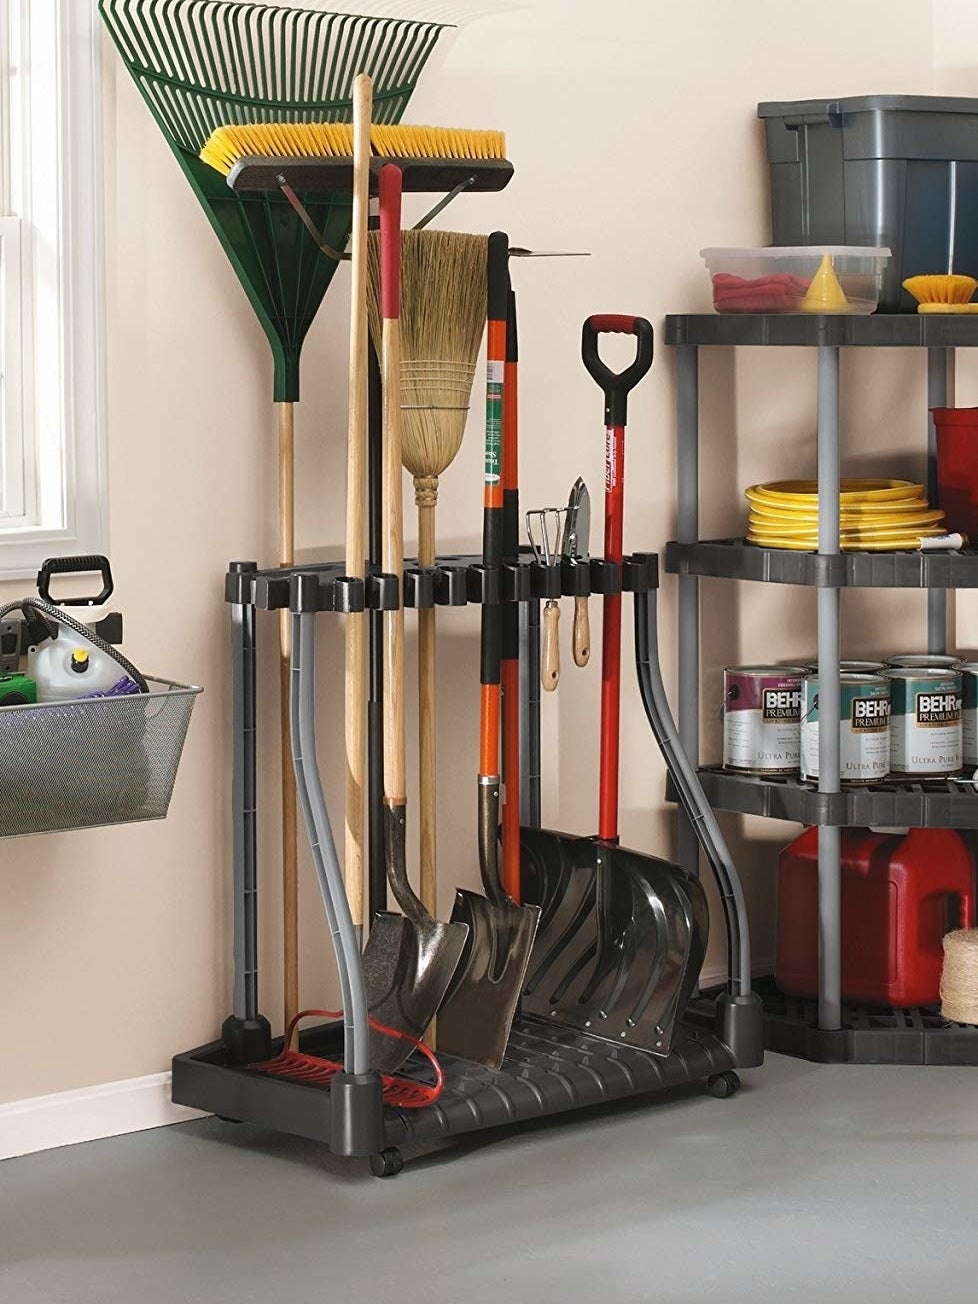 A tool stand holding a rake, two shovels, a garden rake, two brooms, and a snow shovel